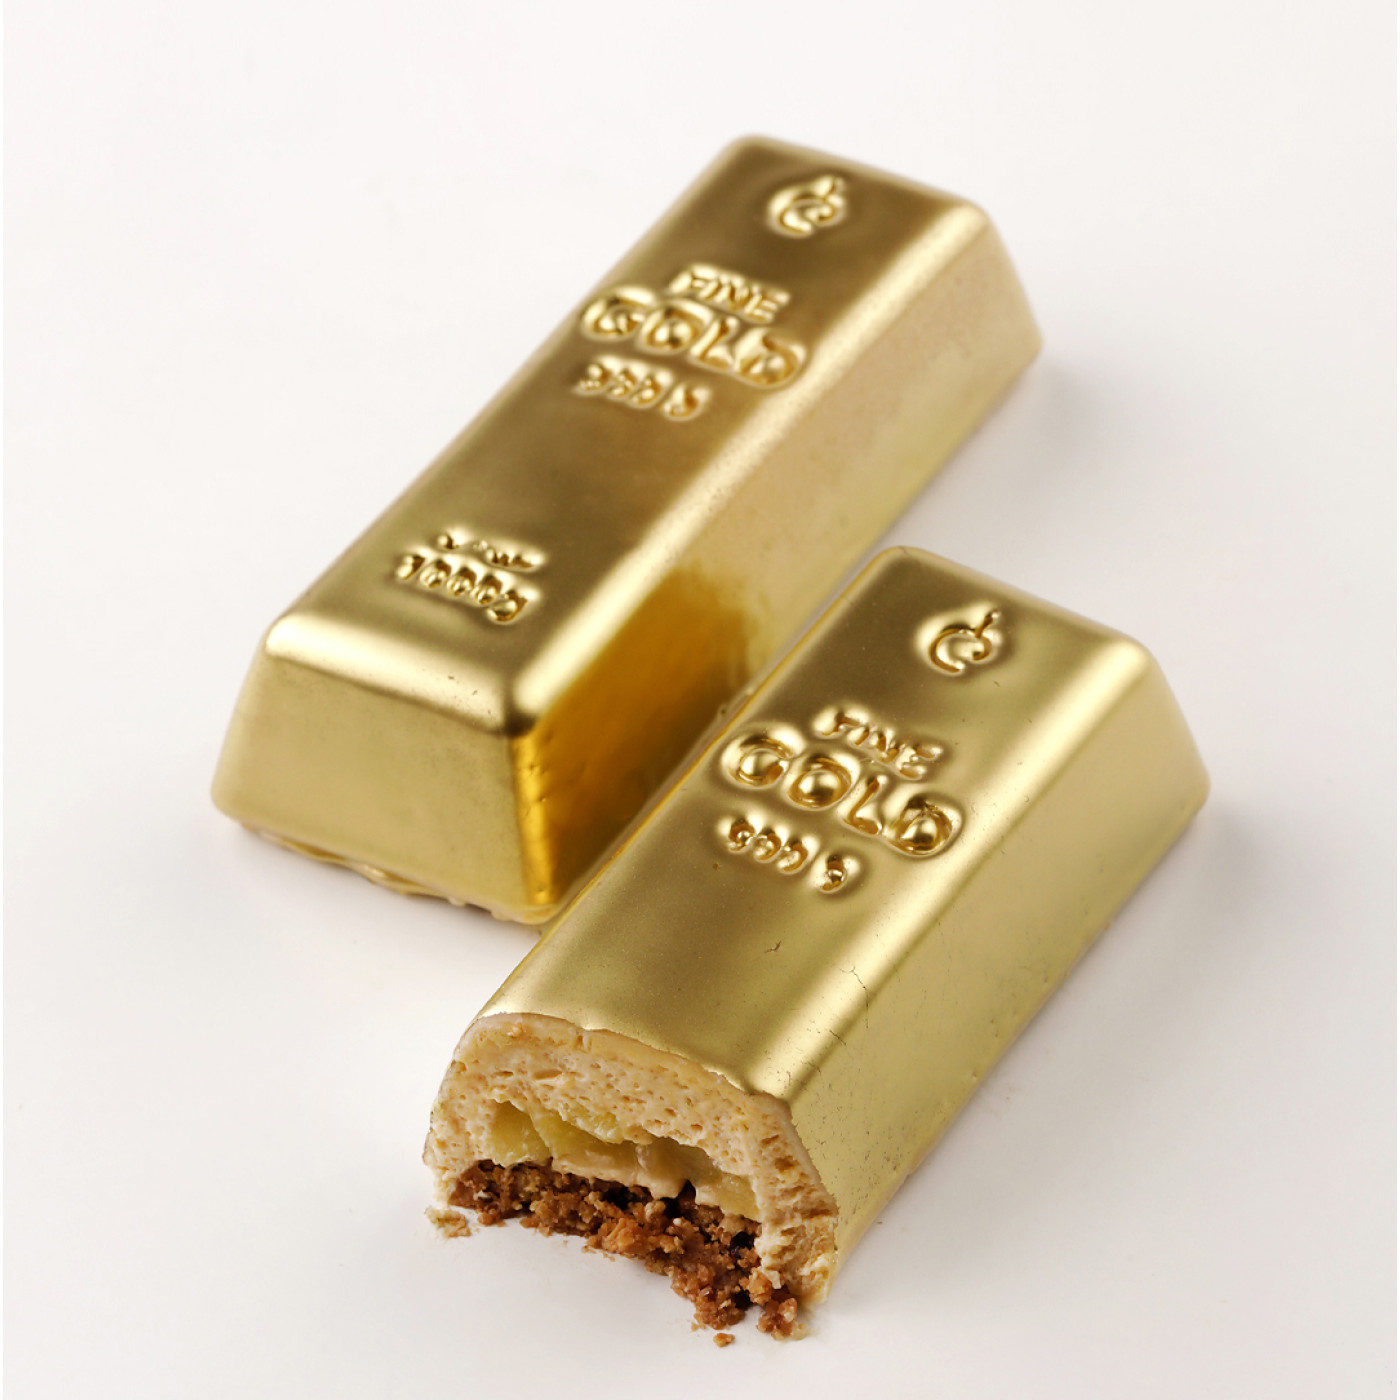 Gold Bar cake silicone mould handmade